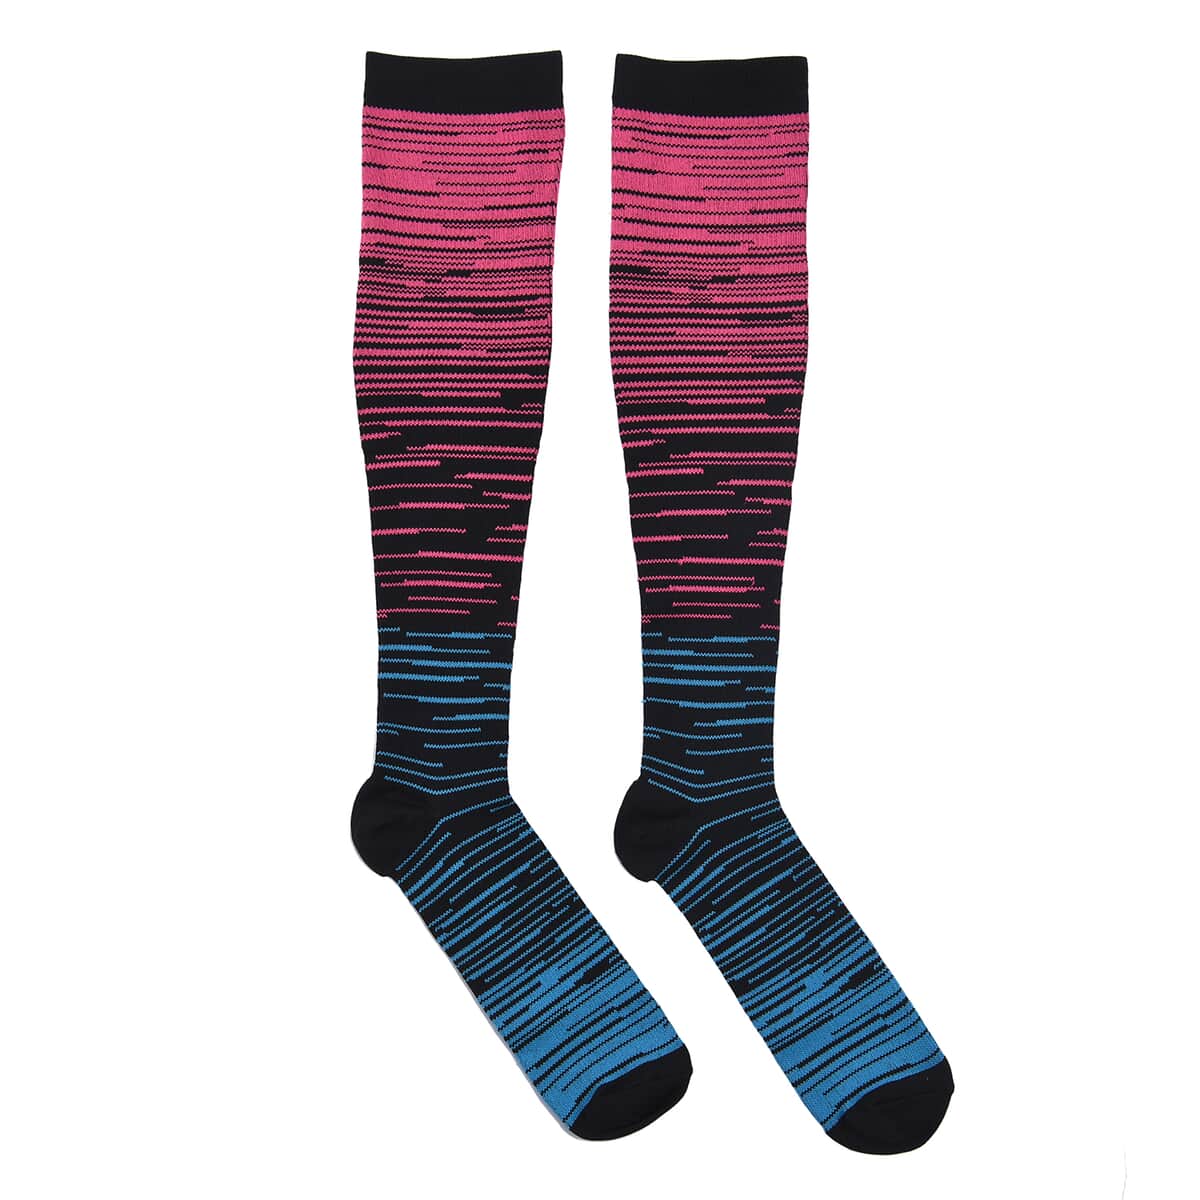 Set of 4 Pairs Knee Length Copper Infused Compression Socks - Multi Stripe (L/XL) image number 4